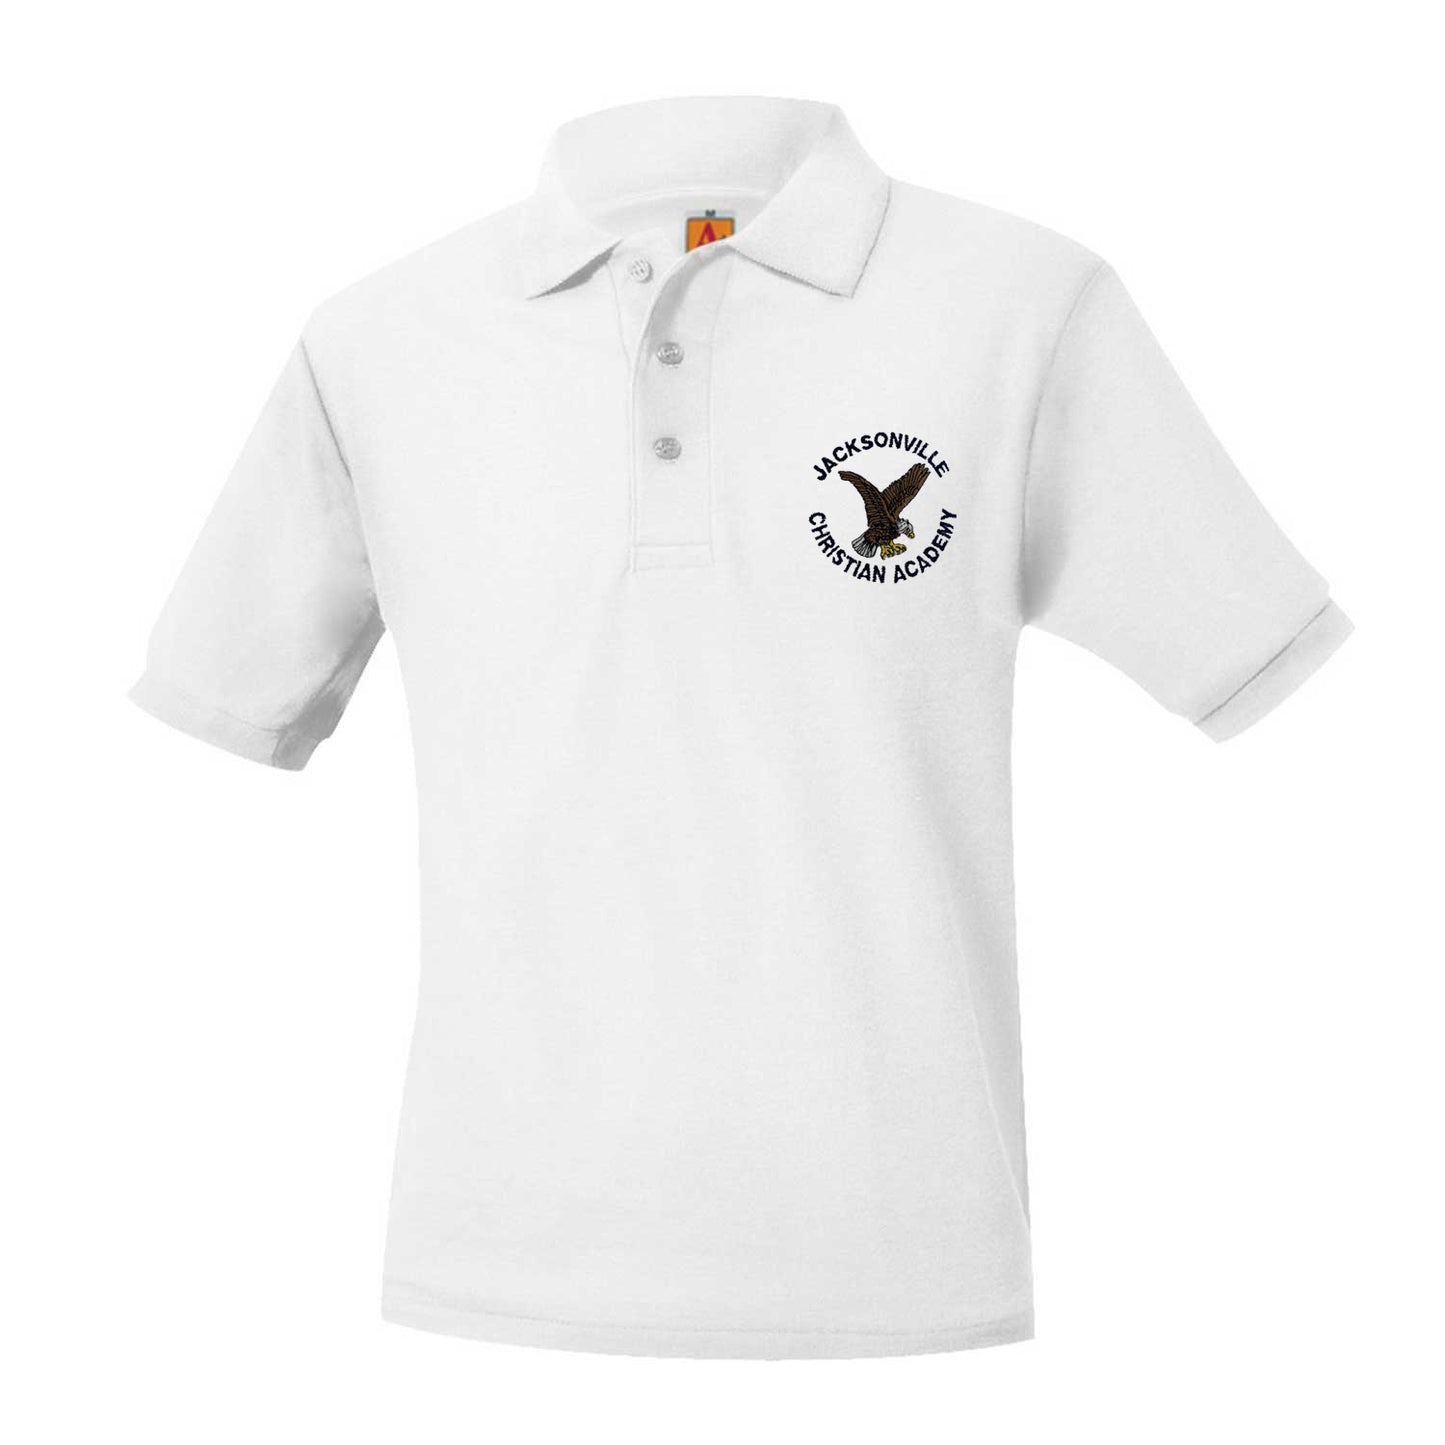 Youth Short Sleeve Pique Polo With Jacksonville Christian Logo